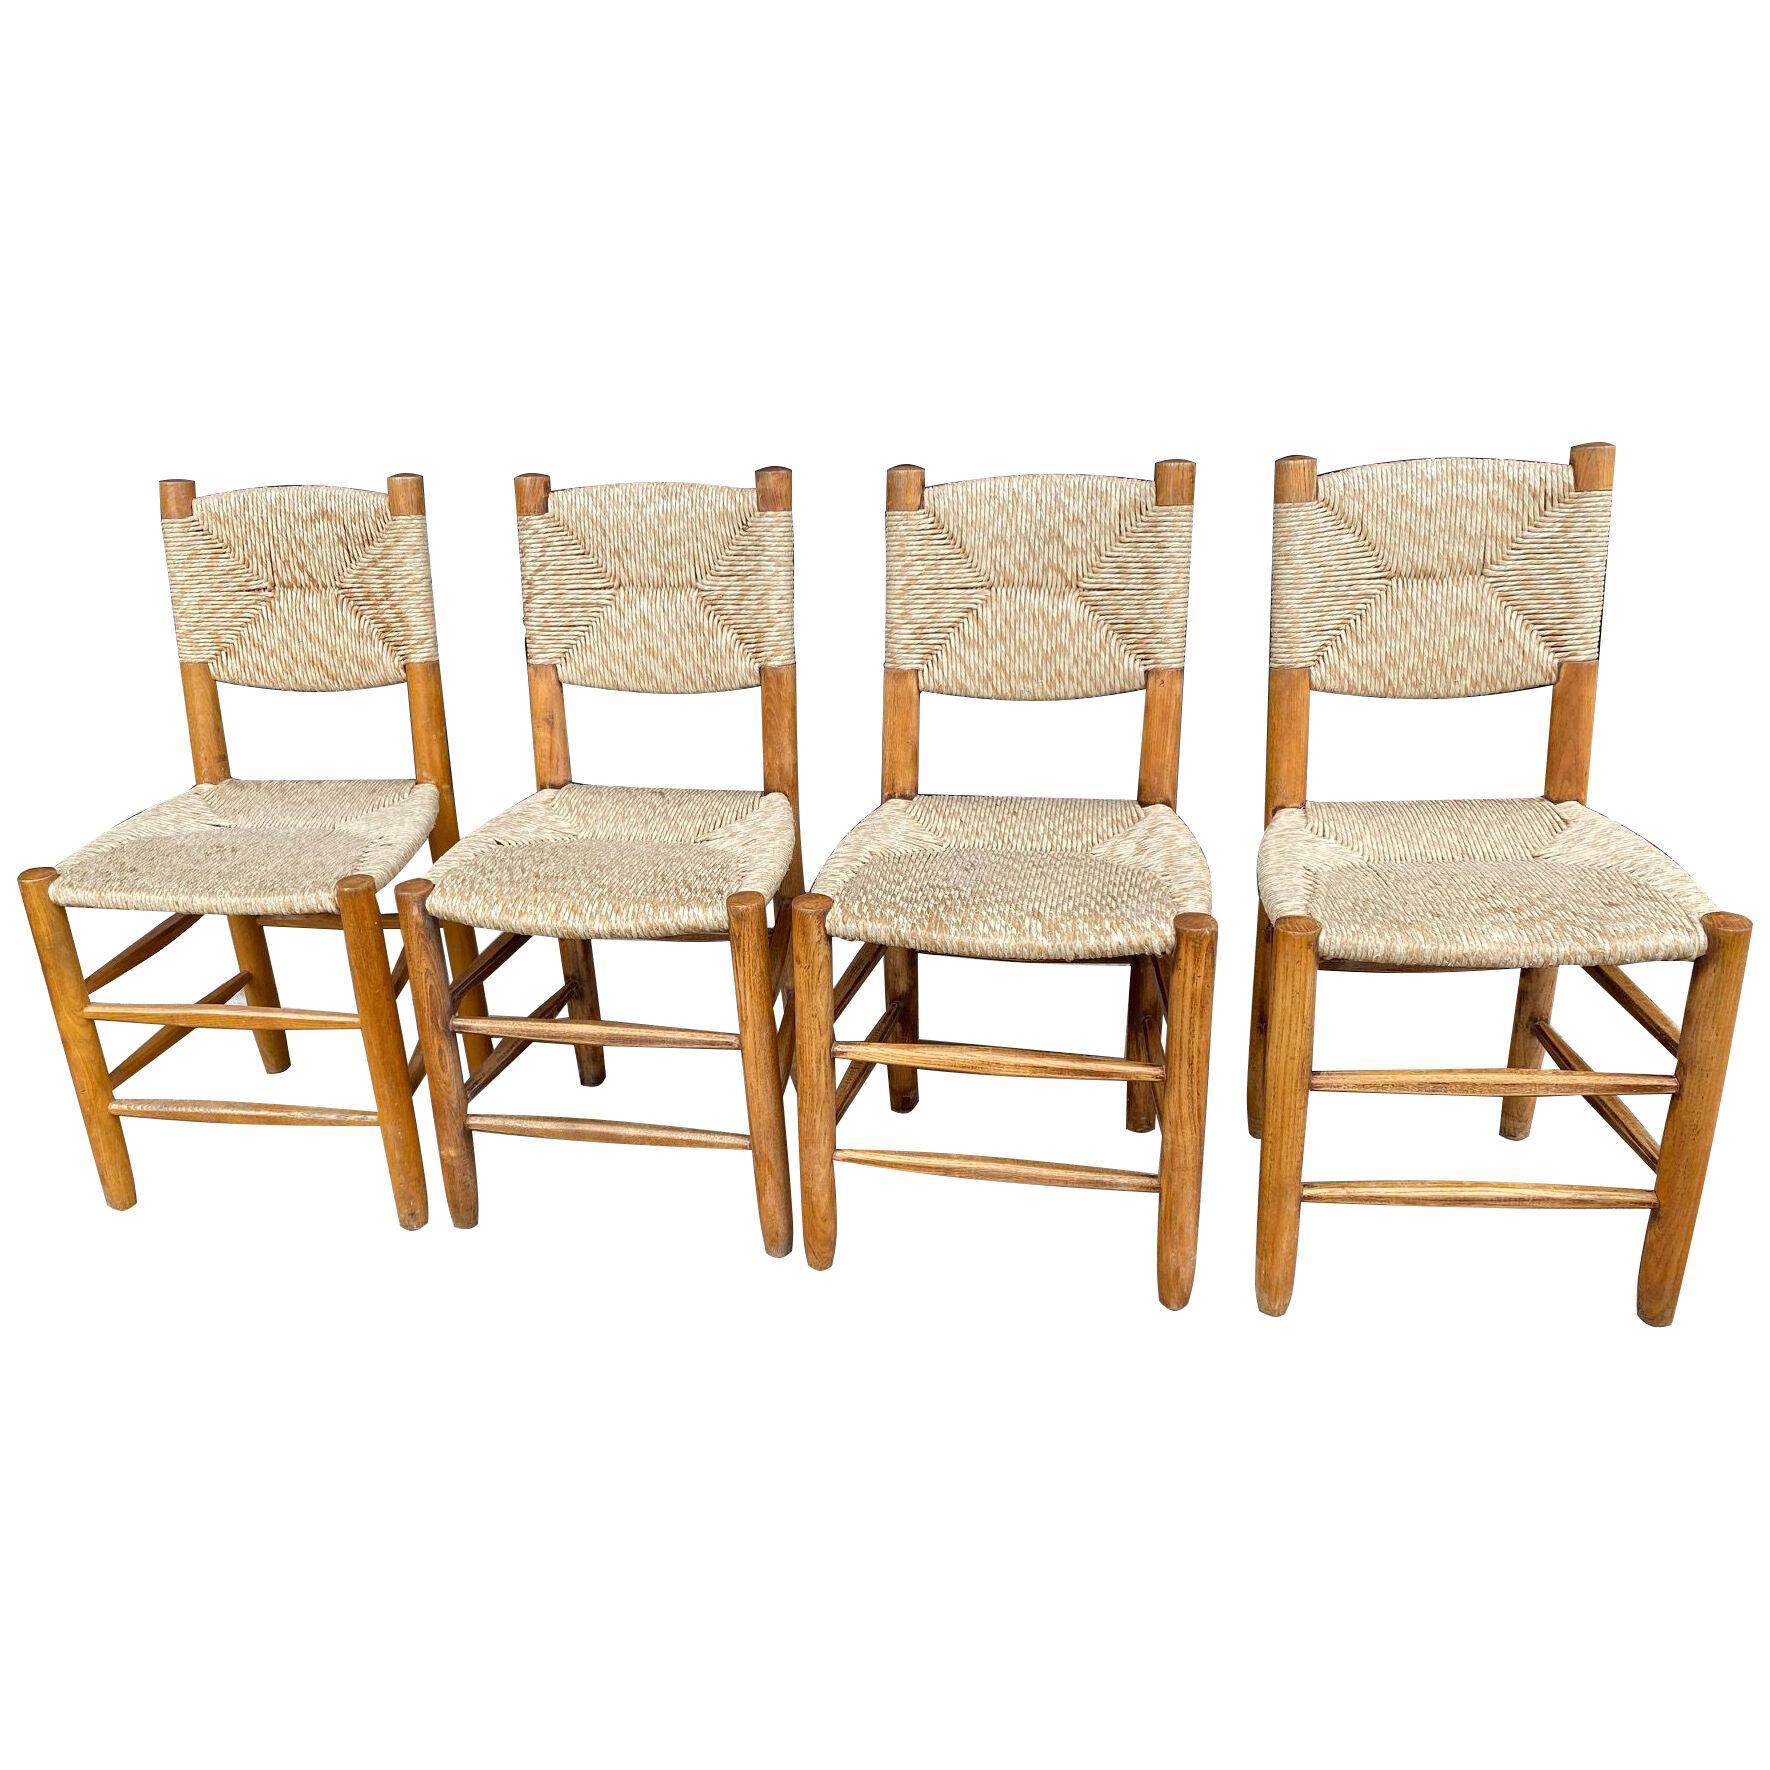 Set of four "Bauche" chairs by Charlotte Perriand, Steph Simon editions